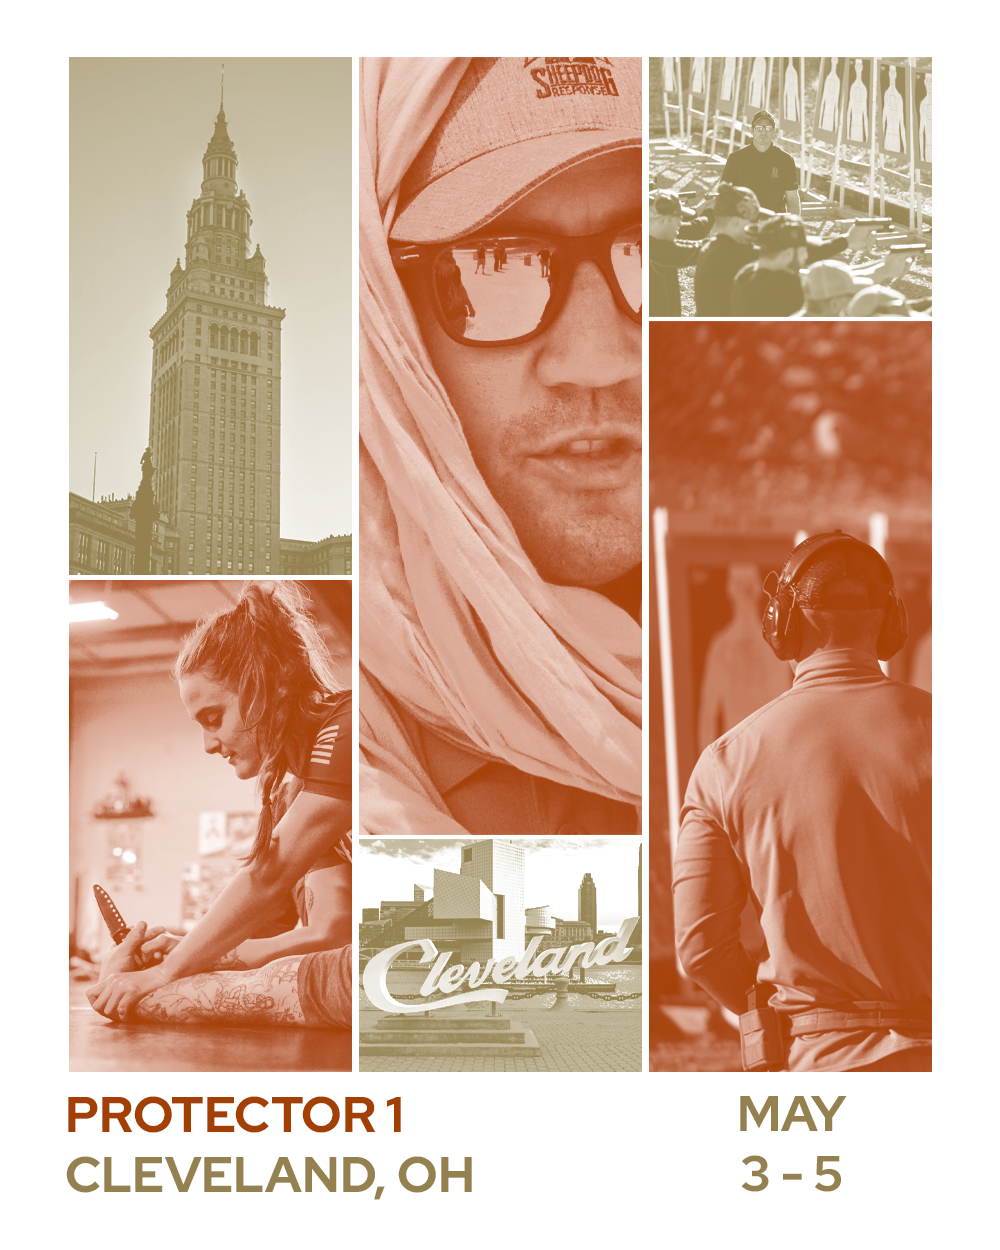 Cleveland, OH (Middlefield, OH) - Protector 1 (May 3rd-5th 2024)